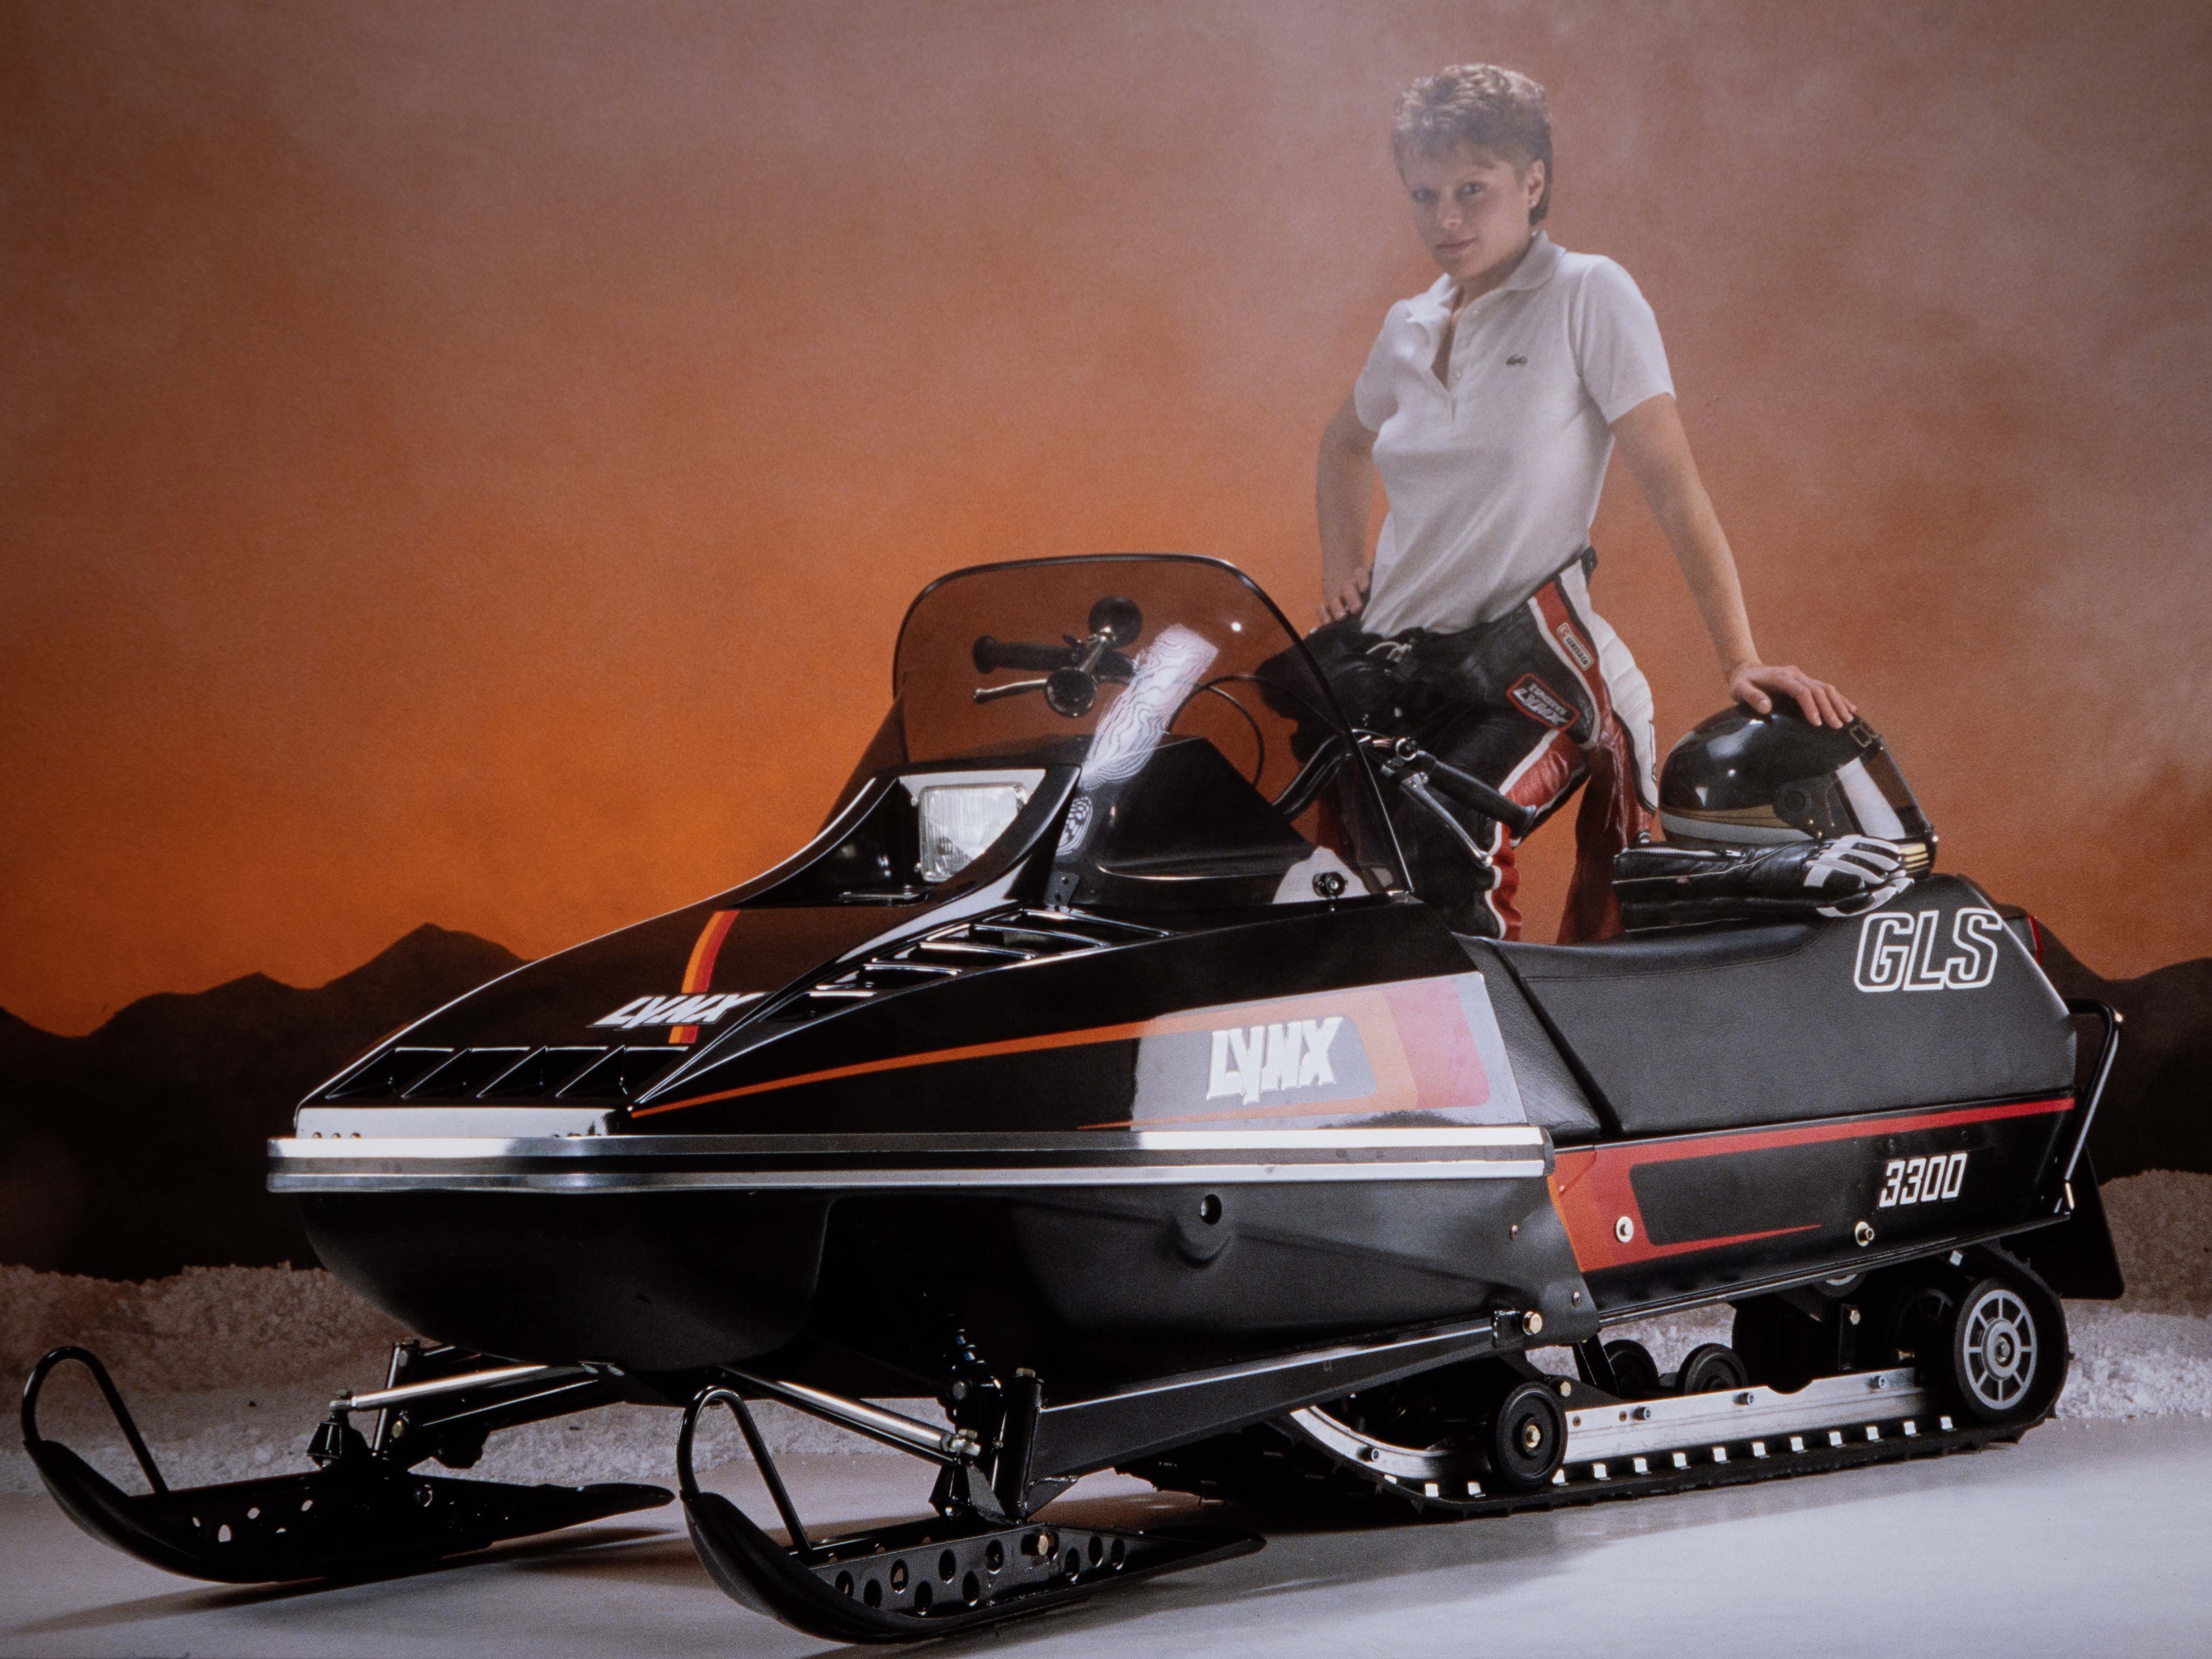 Woman posing in studio with Lynx GLS 3300 1985 snowmobile